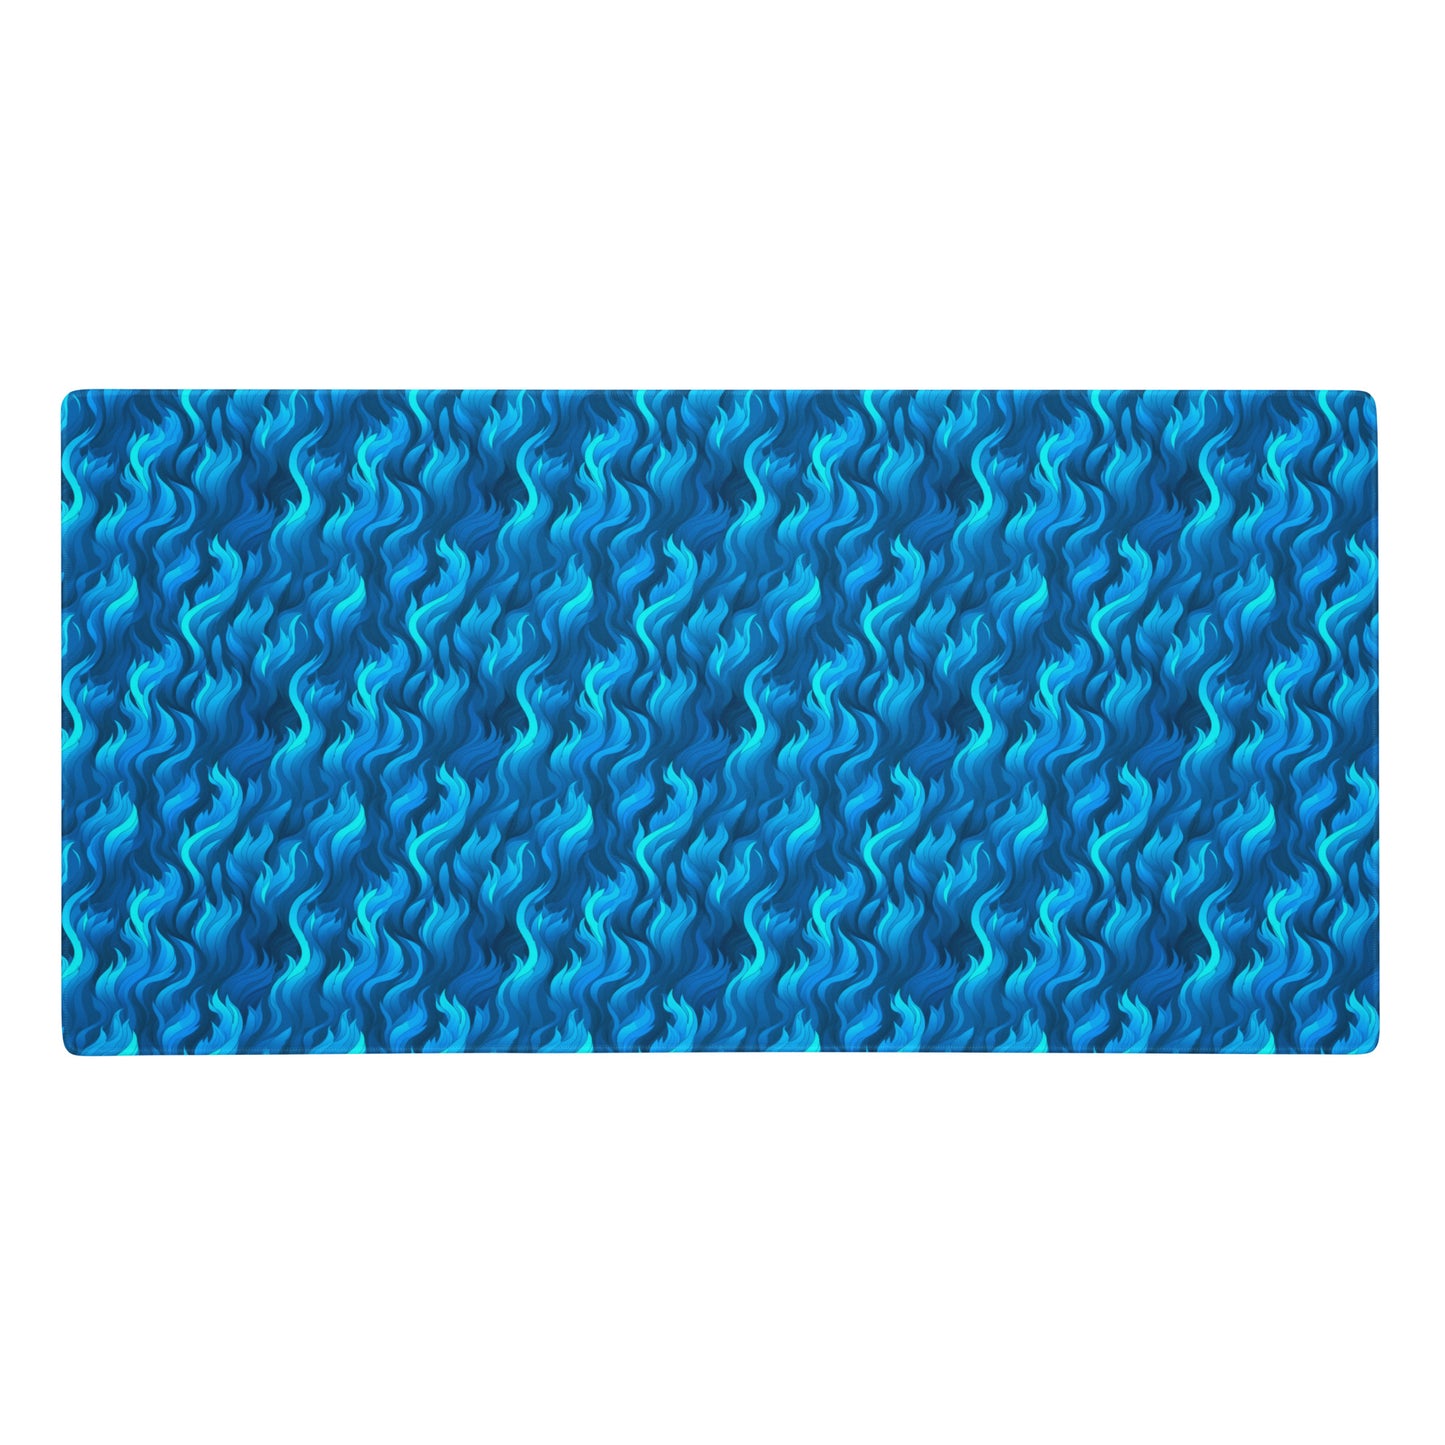 A 36" x 18" desk pad with a wavy flame pattern on it. Blue in color.